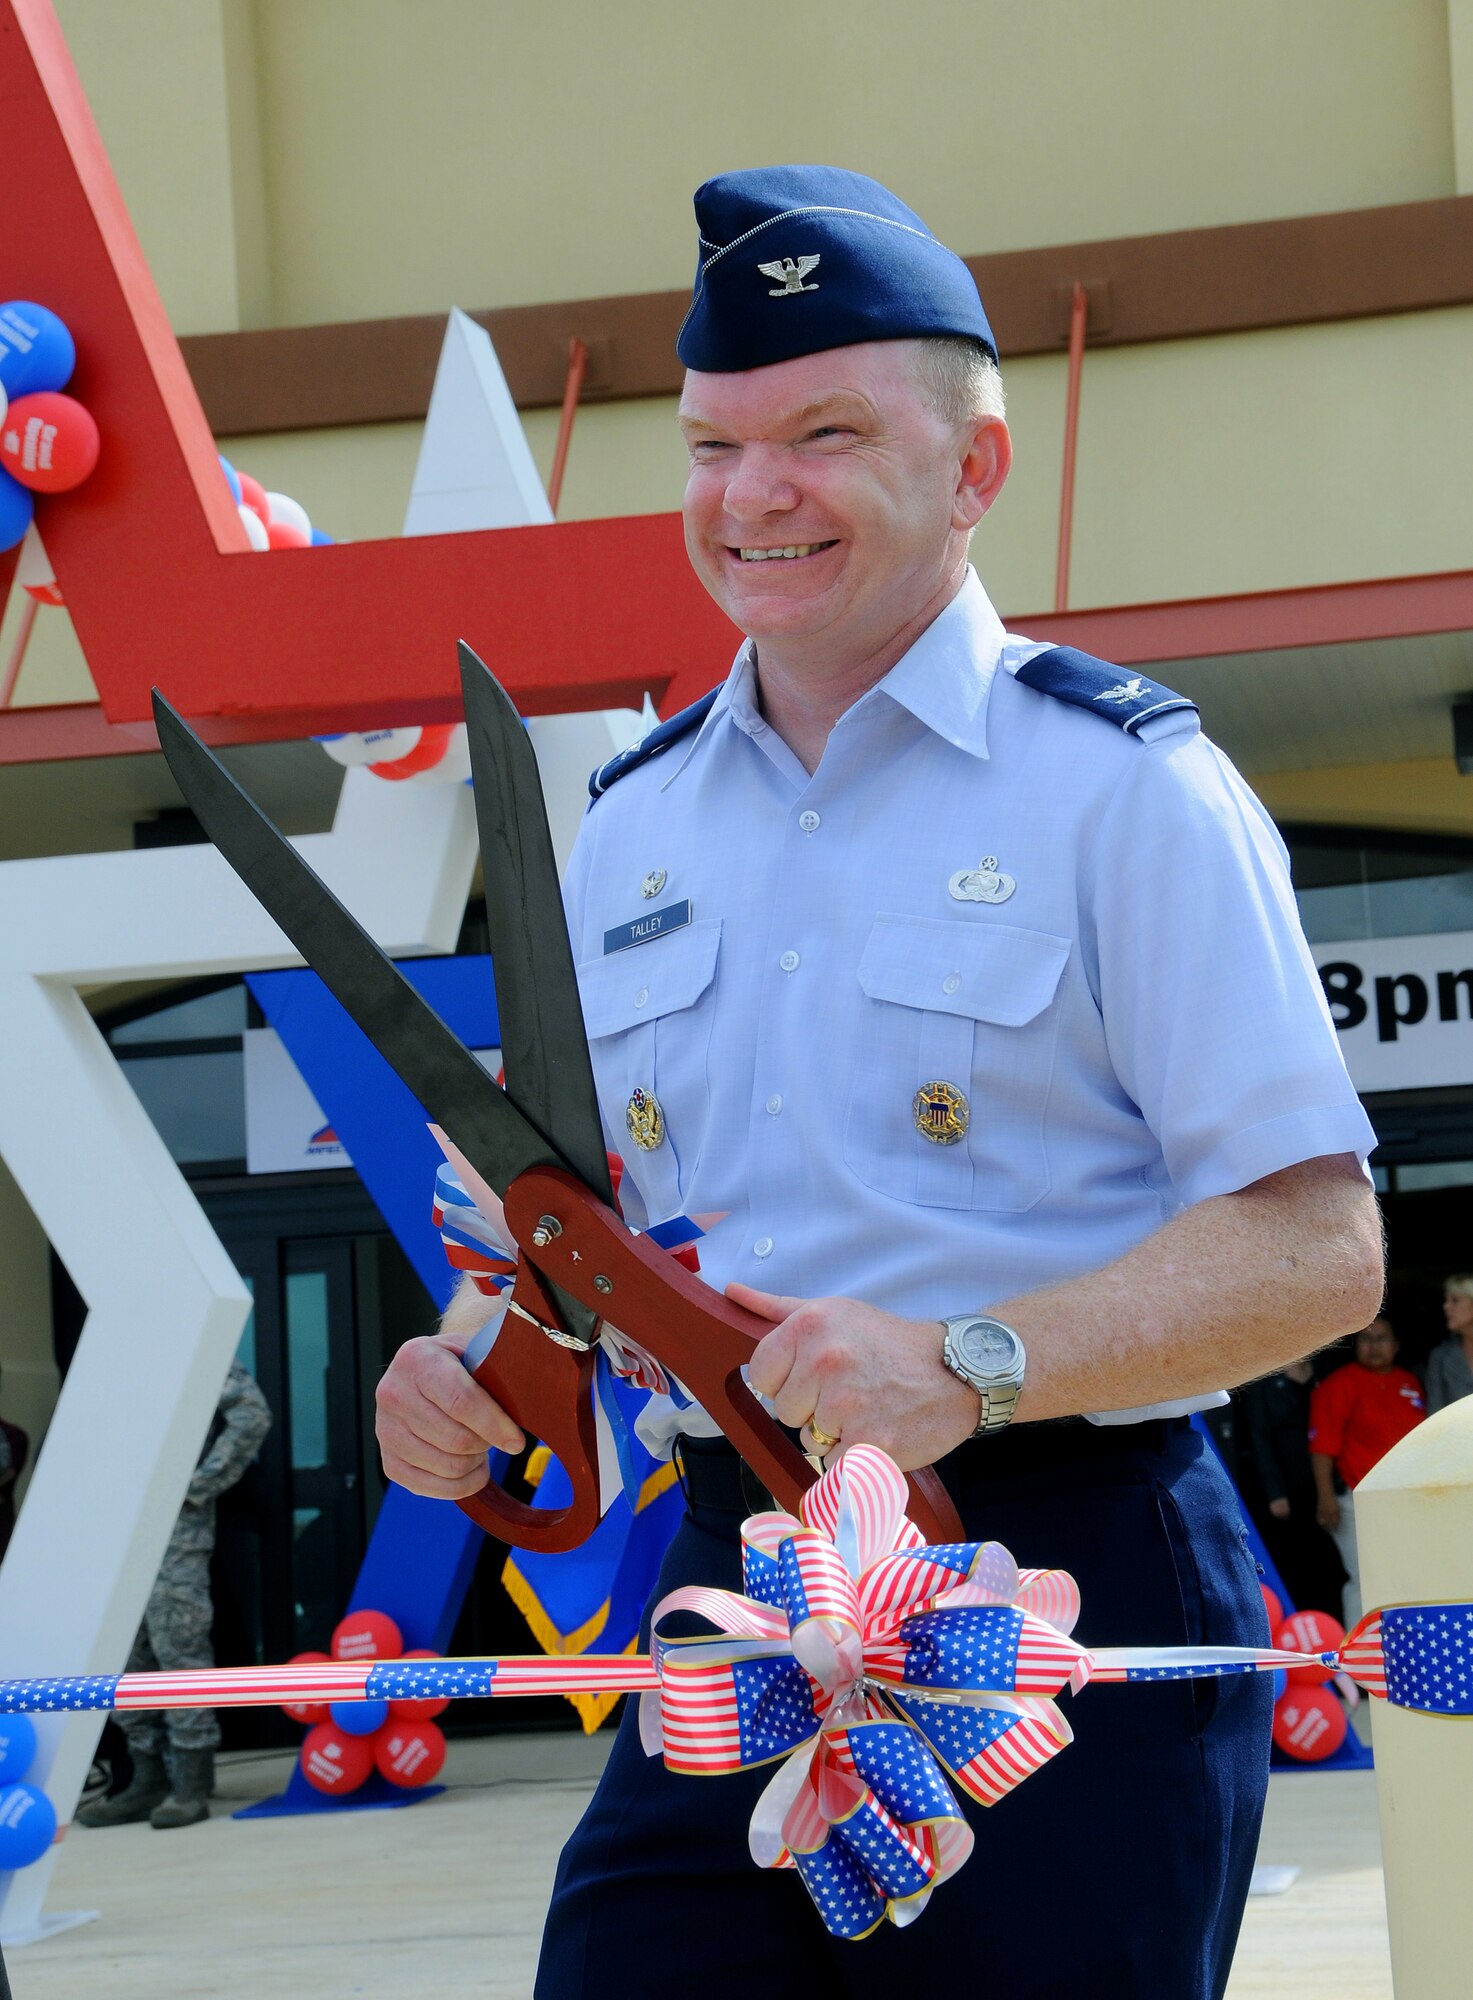 ANDERSEN AIR FORCE BASE, Guam -- Colonel Mark Talley, 36th Mission Support Group commander, waits with scissors in hand at the BX Grand Opening here Sept. 10. The new BX, located across the street from the Car Care Gas Station, provides a wide variety of services to meet Team Andersen Airmen's needs, including six restaurants, a computer repair shop, a hair salon and many more concession shops. The new BX hours of operation are 9 a.m. to 8 p.m., seven days a week, and from 10 a.m. to 6 p.m. on holidays. (U.S. Air Force photo by Airman 1st Class Courtney Witt)